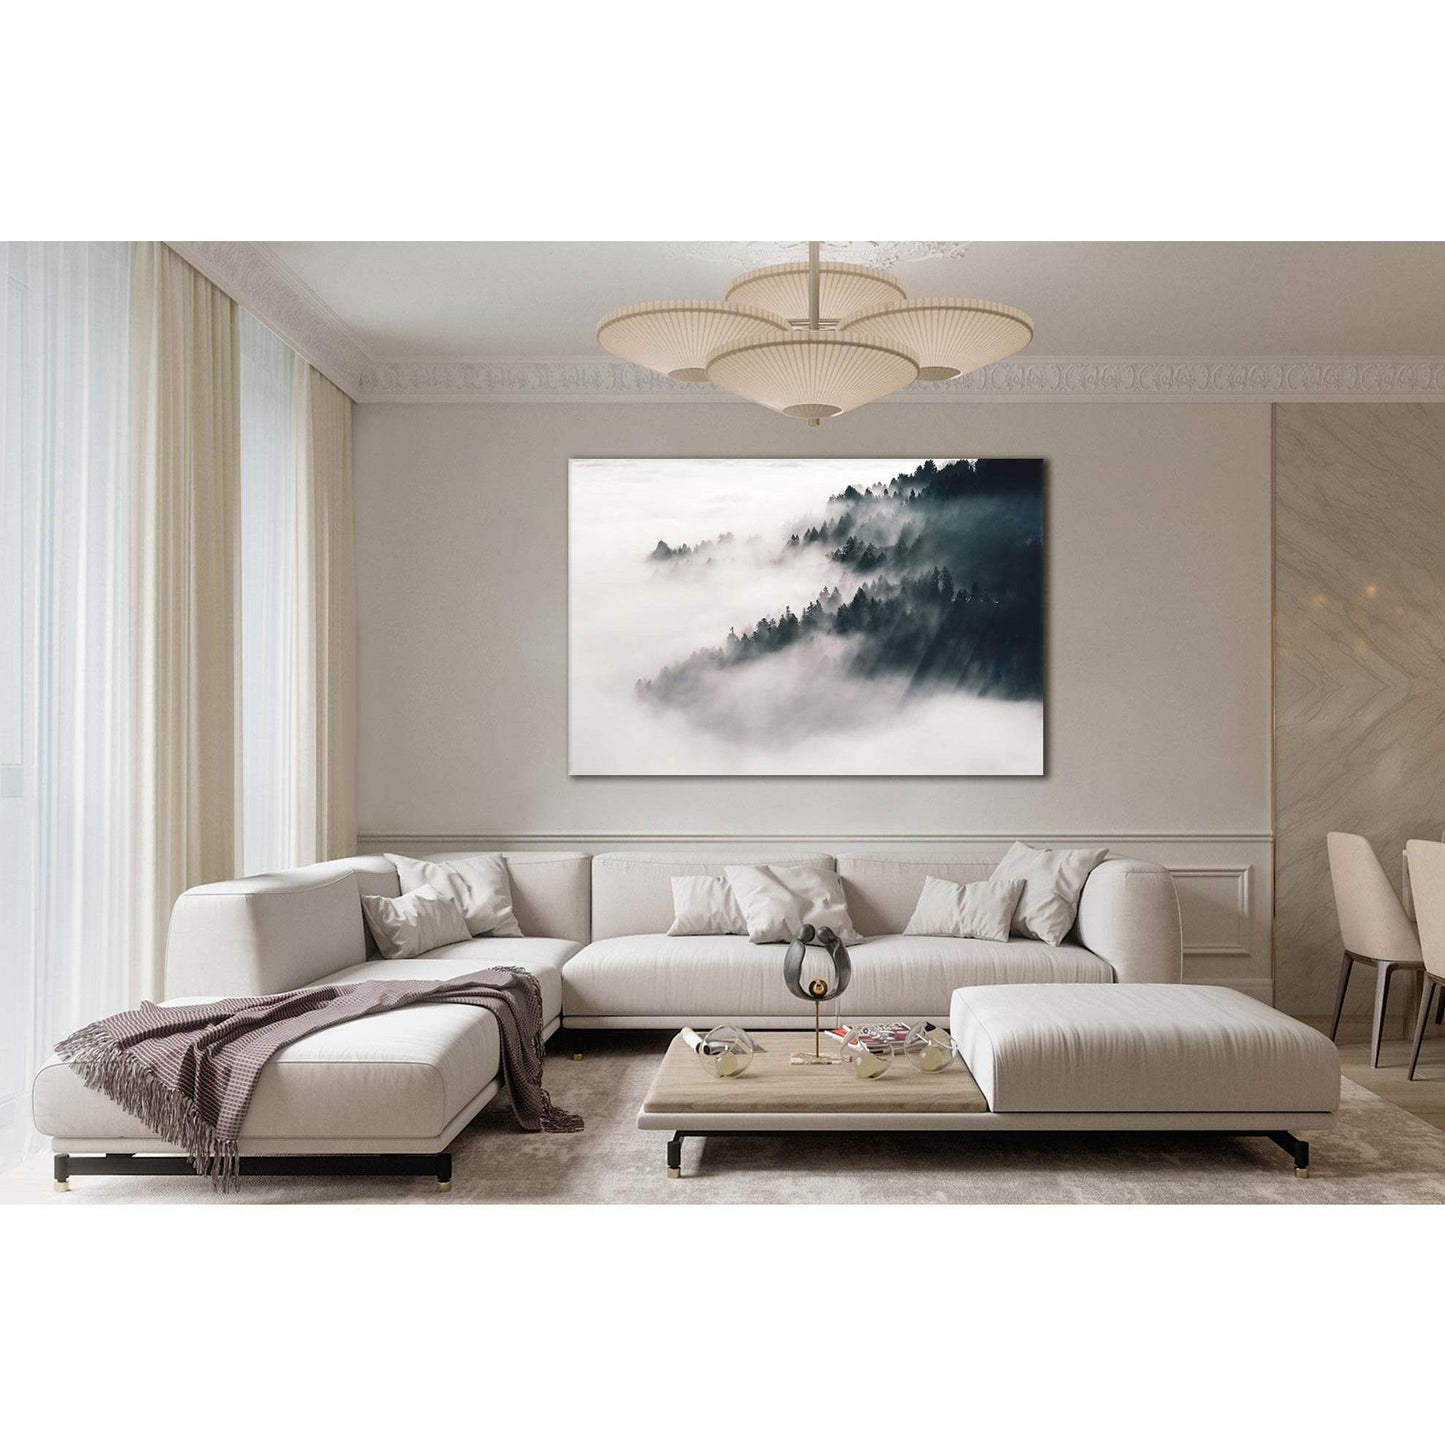 Misty Mountain Multi-Panel Wall Art for a Soothing AmbianceThis serene canvas print features a multi-panel display of misty mountains, using a muted palette of grays and blacks. Perfect for creating a calming atmosphere in bedrooms or a touch of sophistic